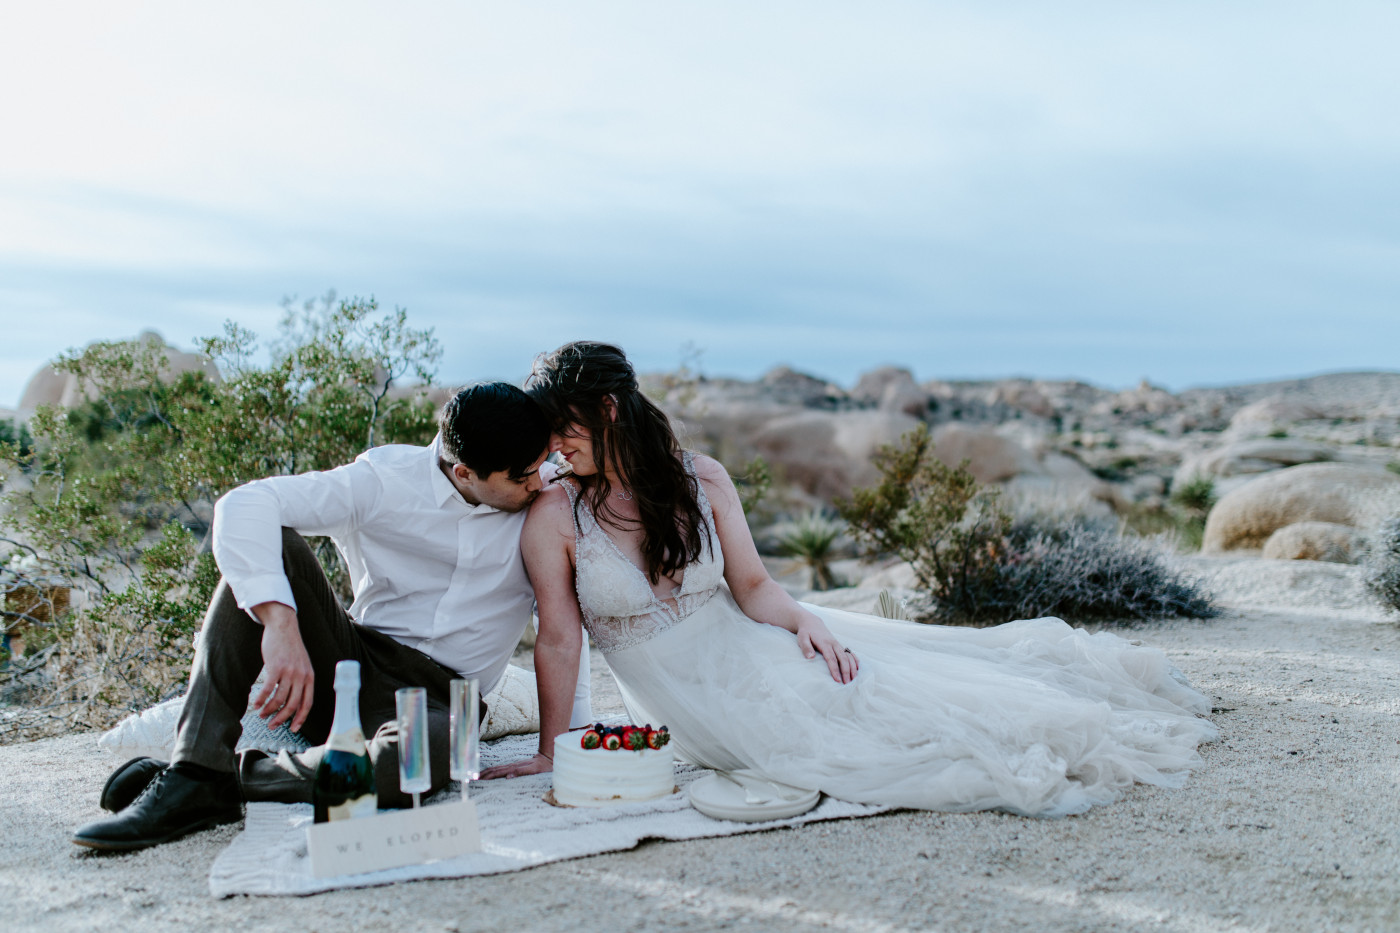 Shelby and Zack have a picnic in Joshua Tree on a boulder.